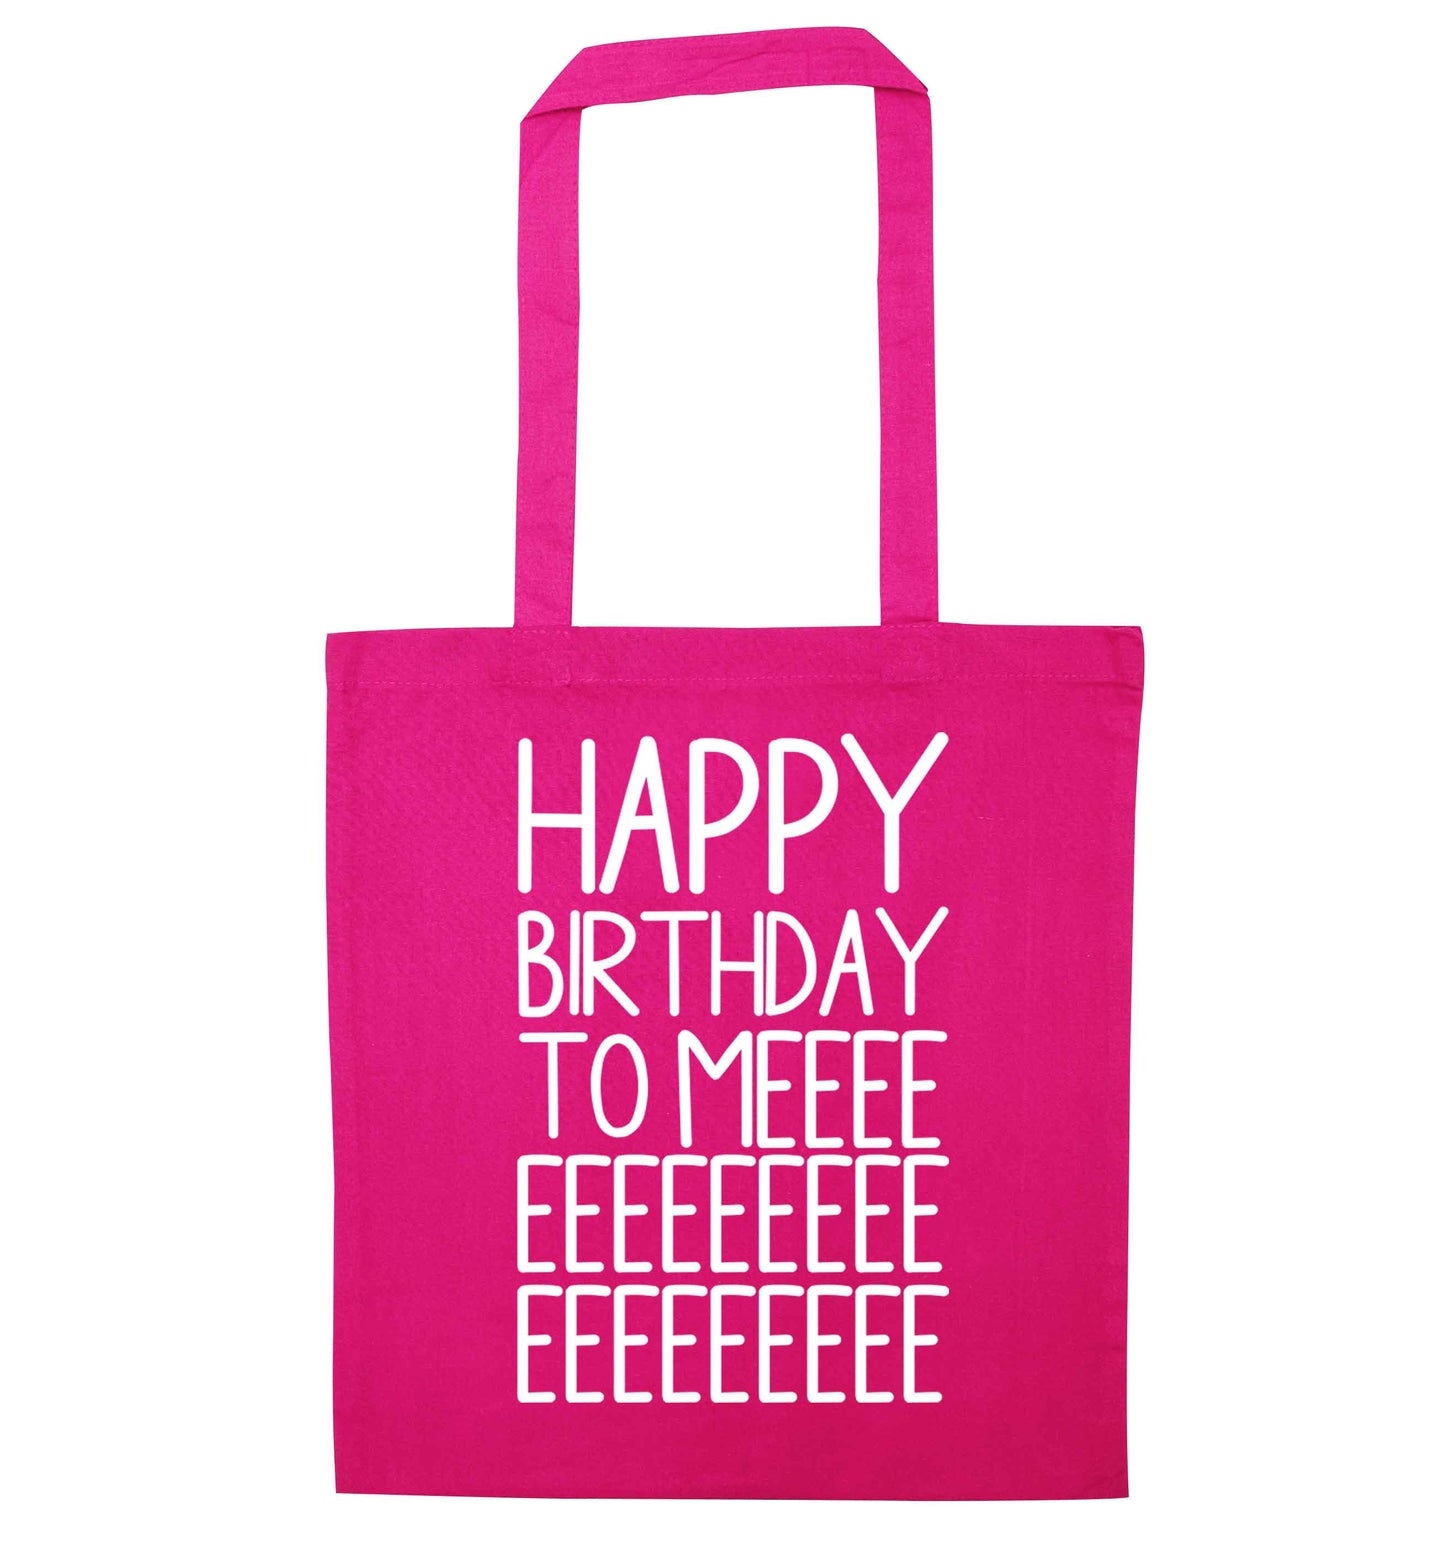 Happy birthday to me pink tote bag